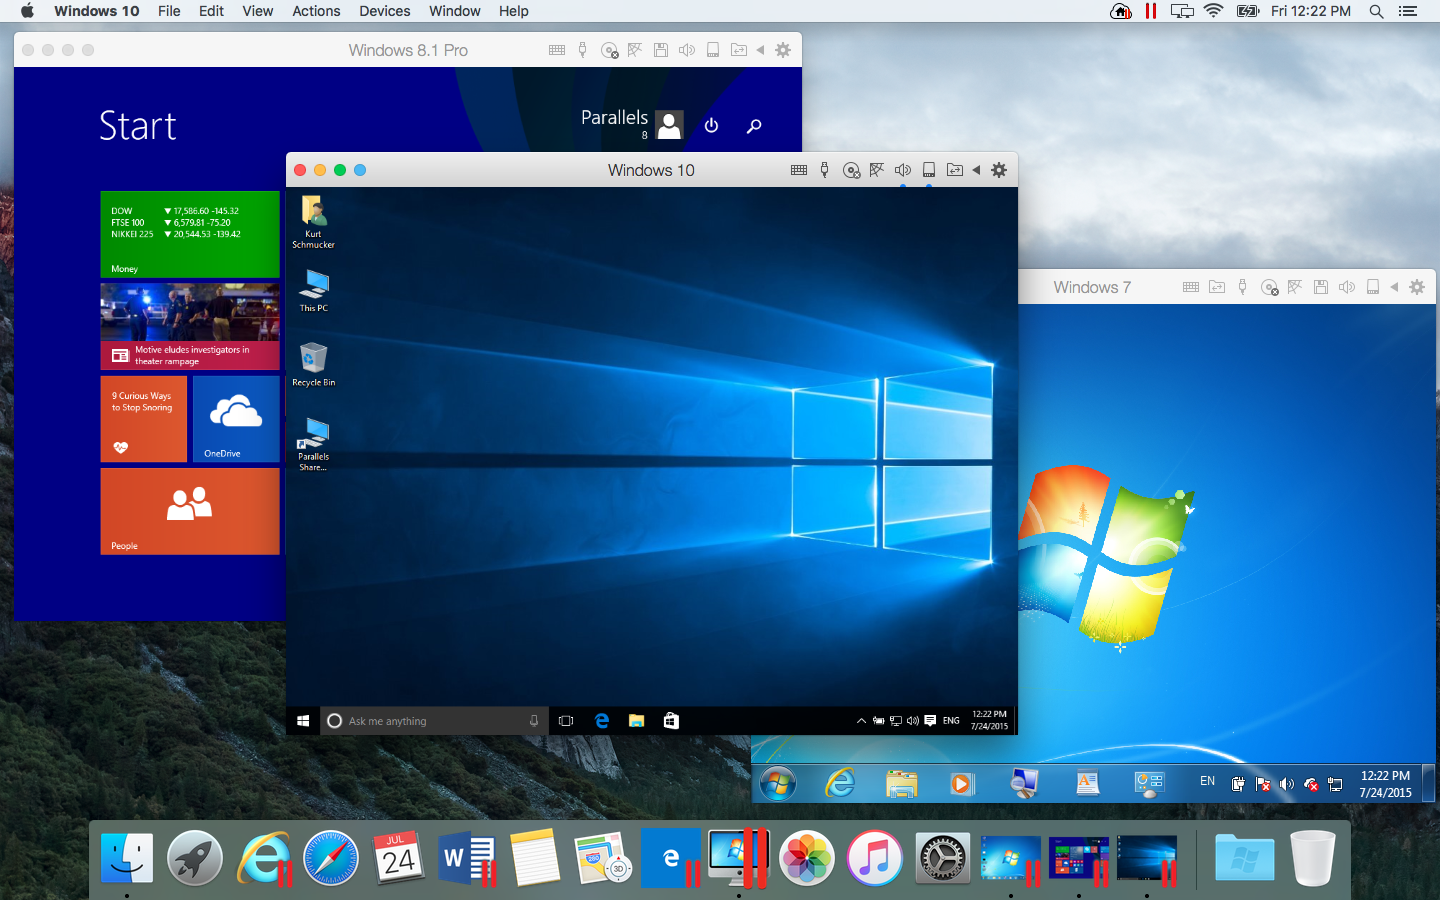 Parallels For Mac Os X 10.9.5